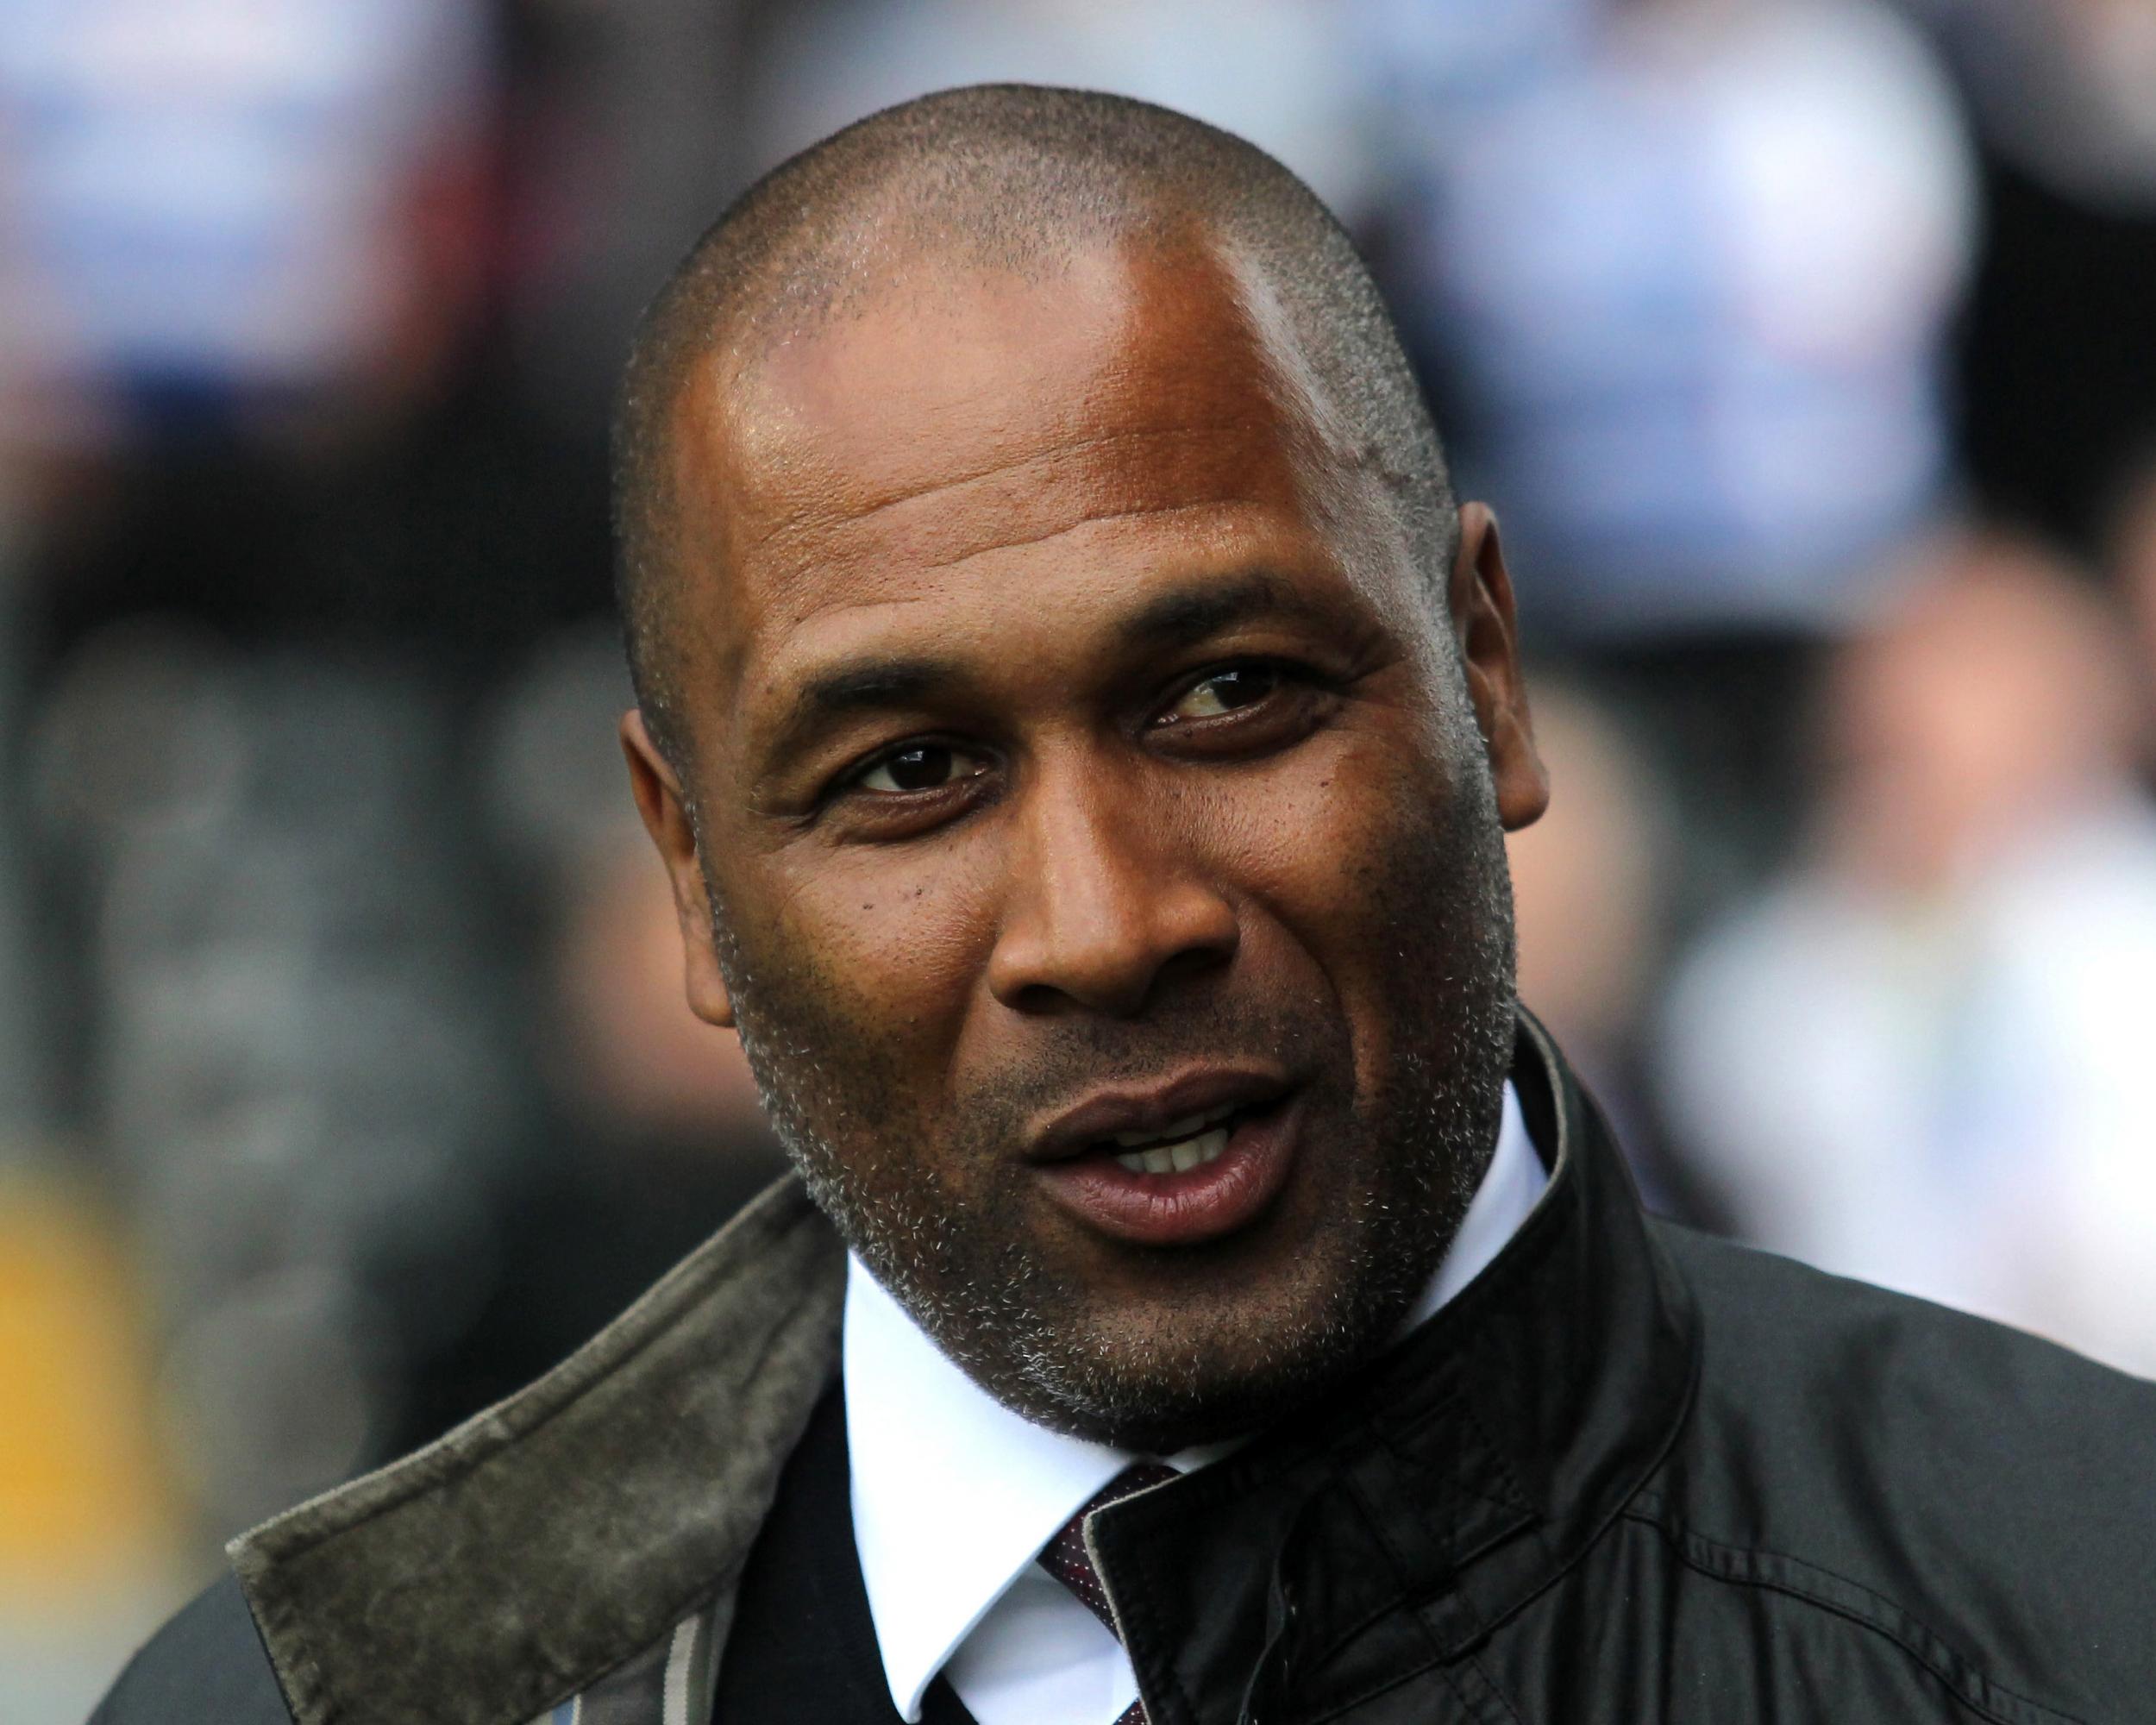 QPR director of football Les Ferdinand came up with the idea